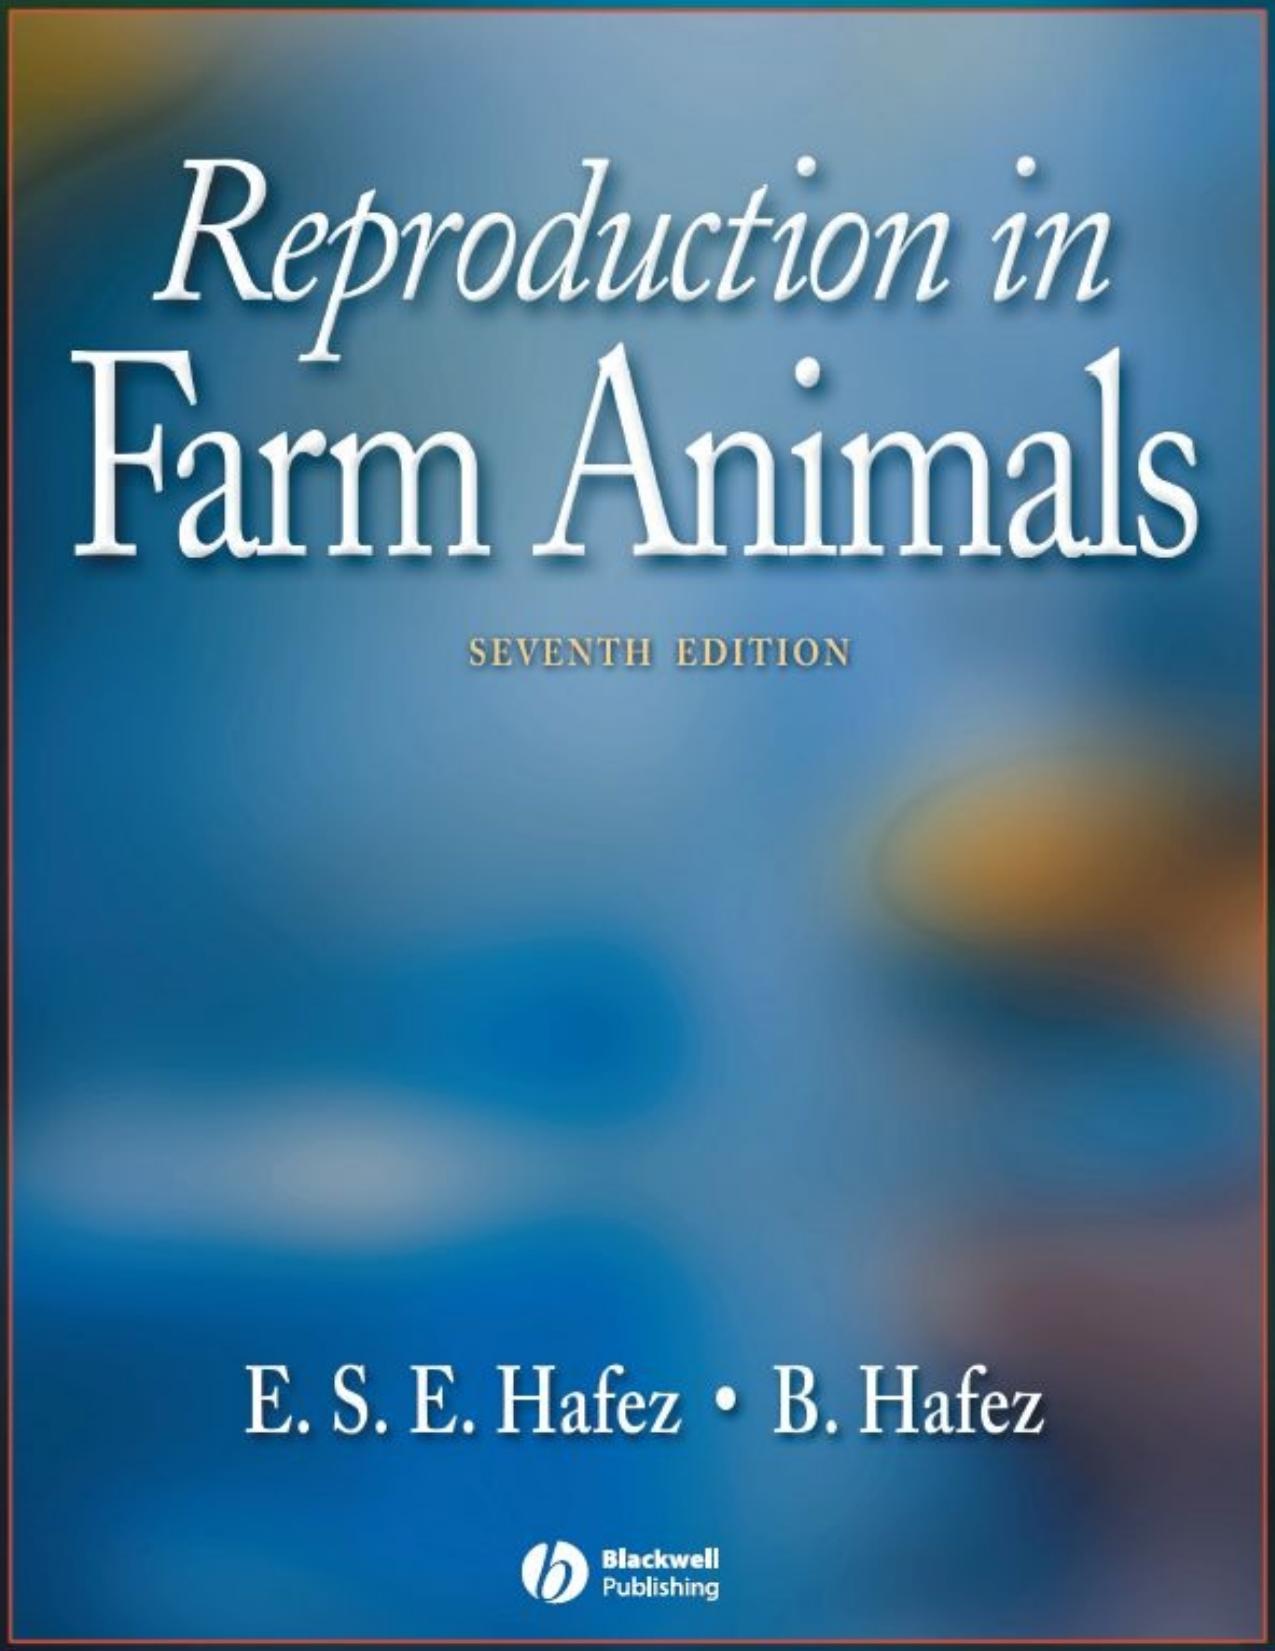 Reproduction in Farm Animals - PDFDrive.com